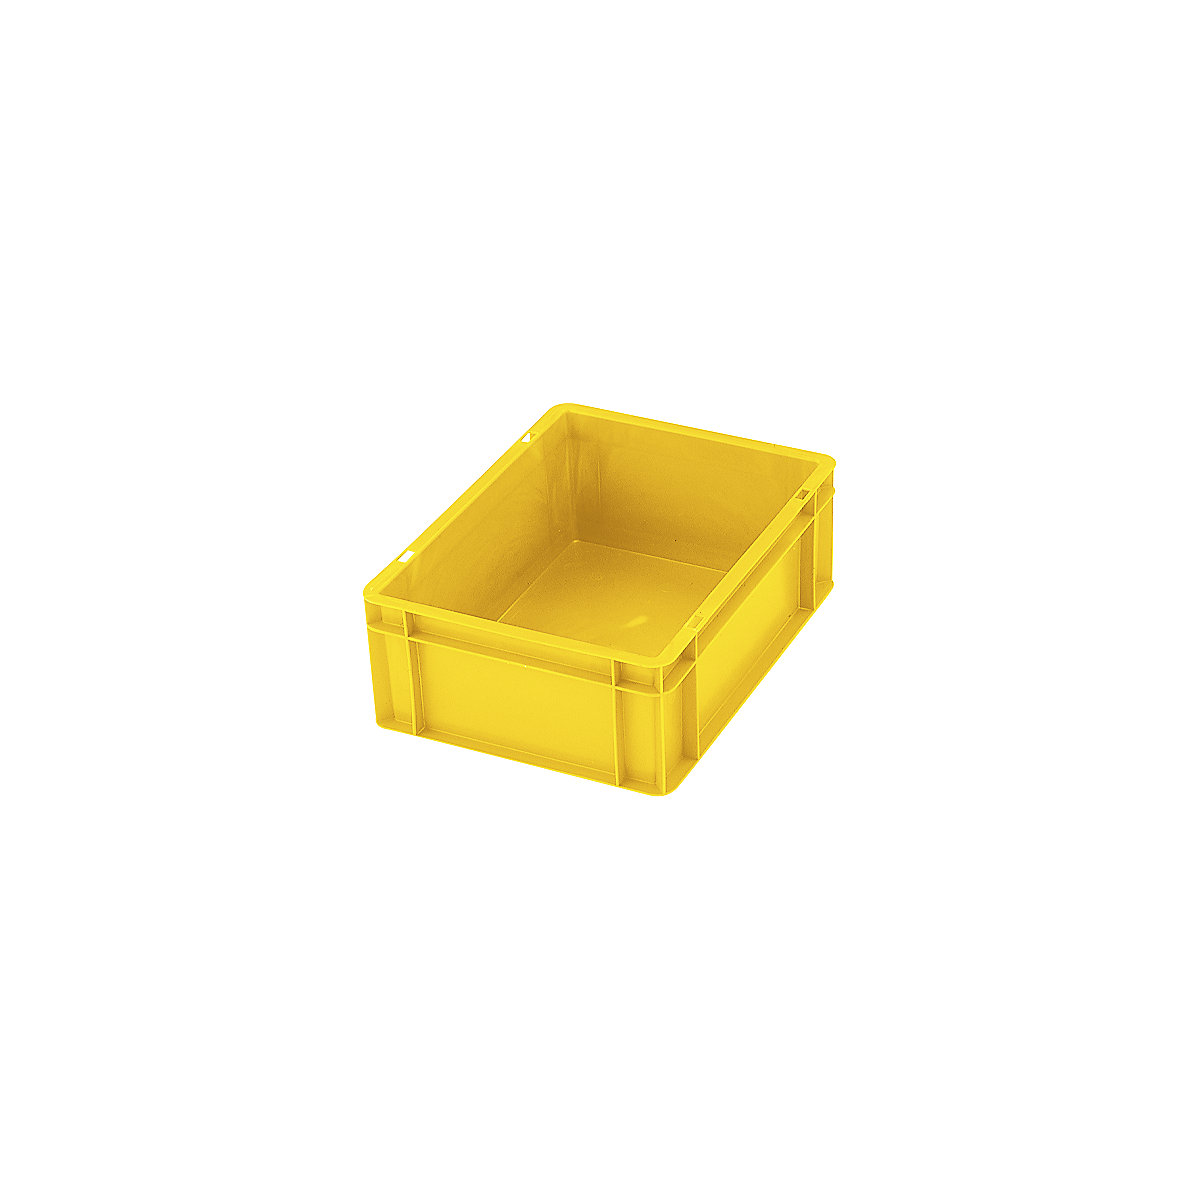 Euro stacking container, closed walls and base, LxWxH 400 x 300 x 50 mm, yellow, pack of 5-1